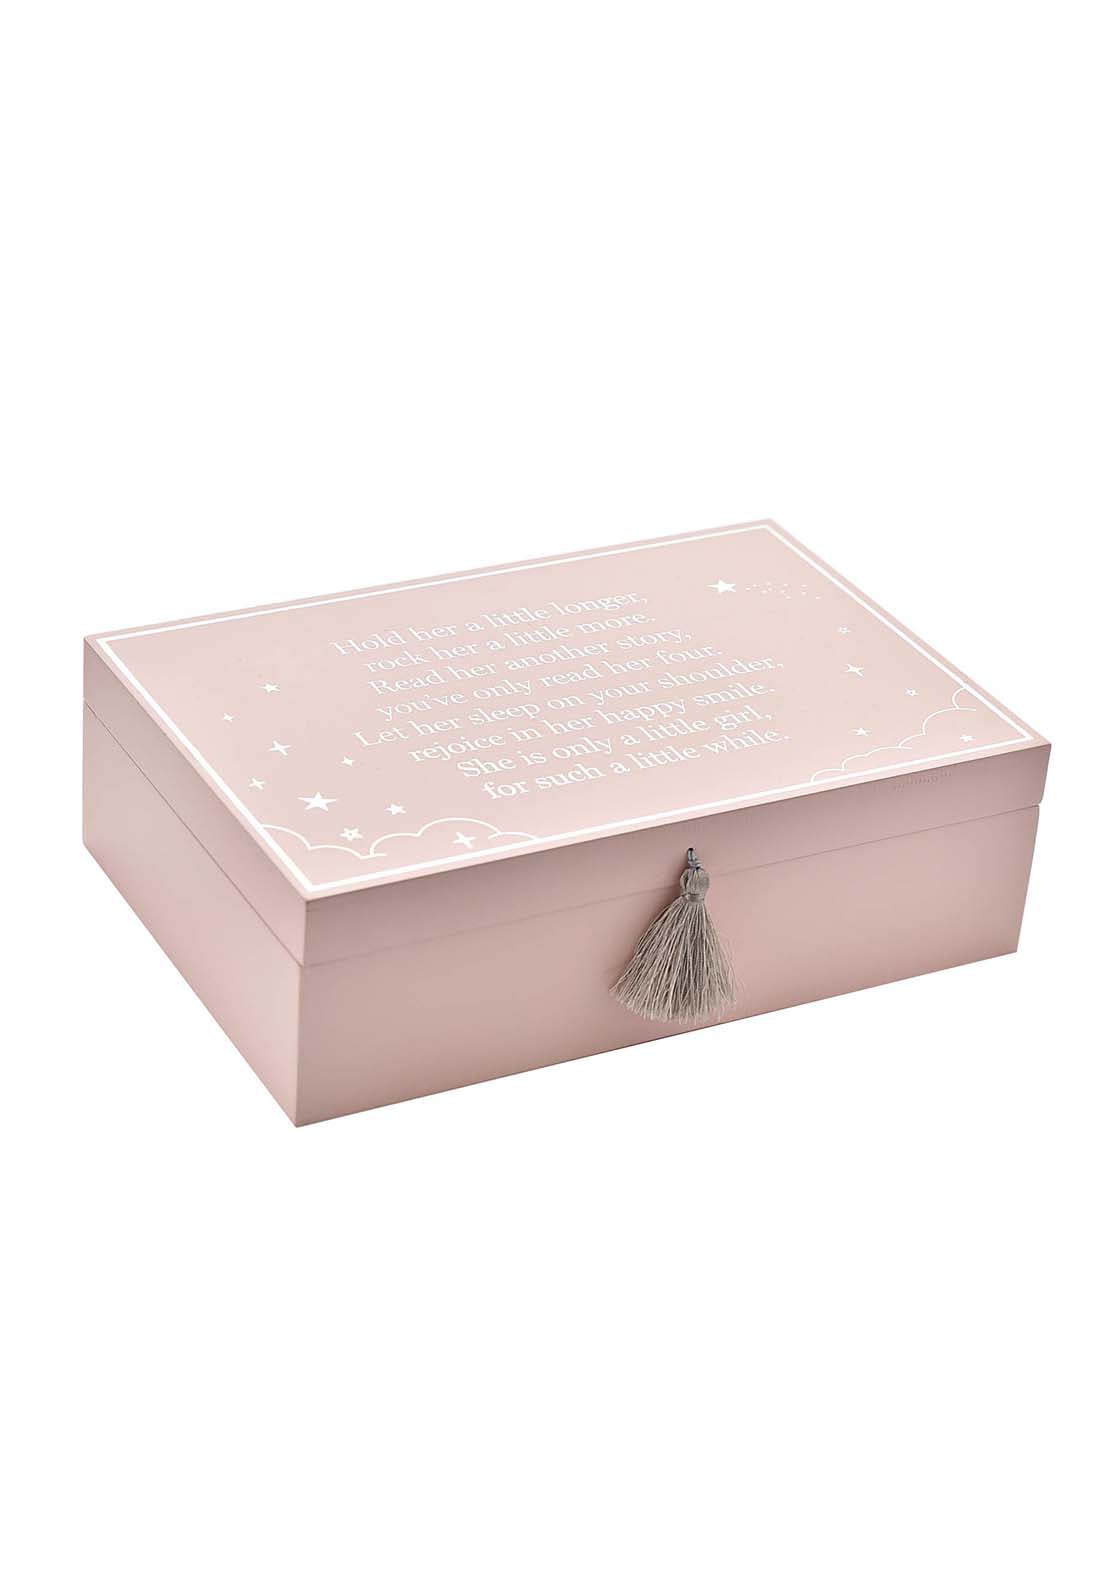 The Home Collection Wooden Keepsake Box - Pink 1 Shaws Department Stores